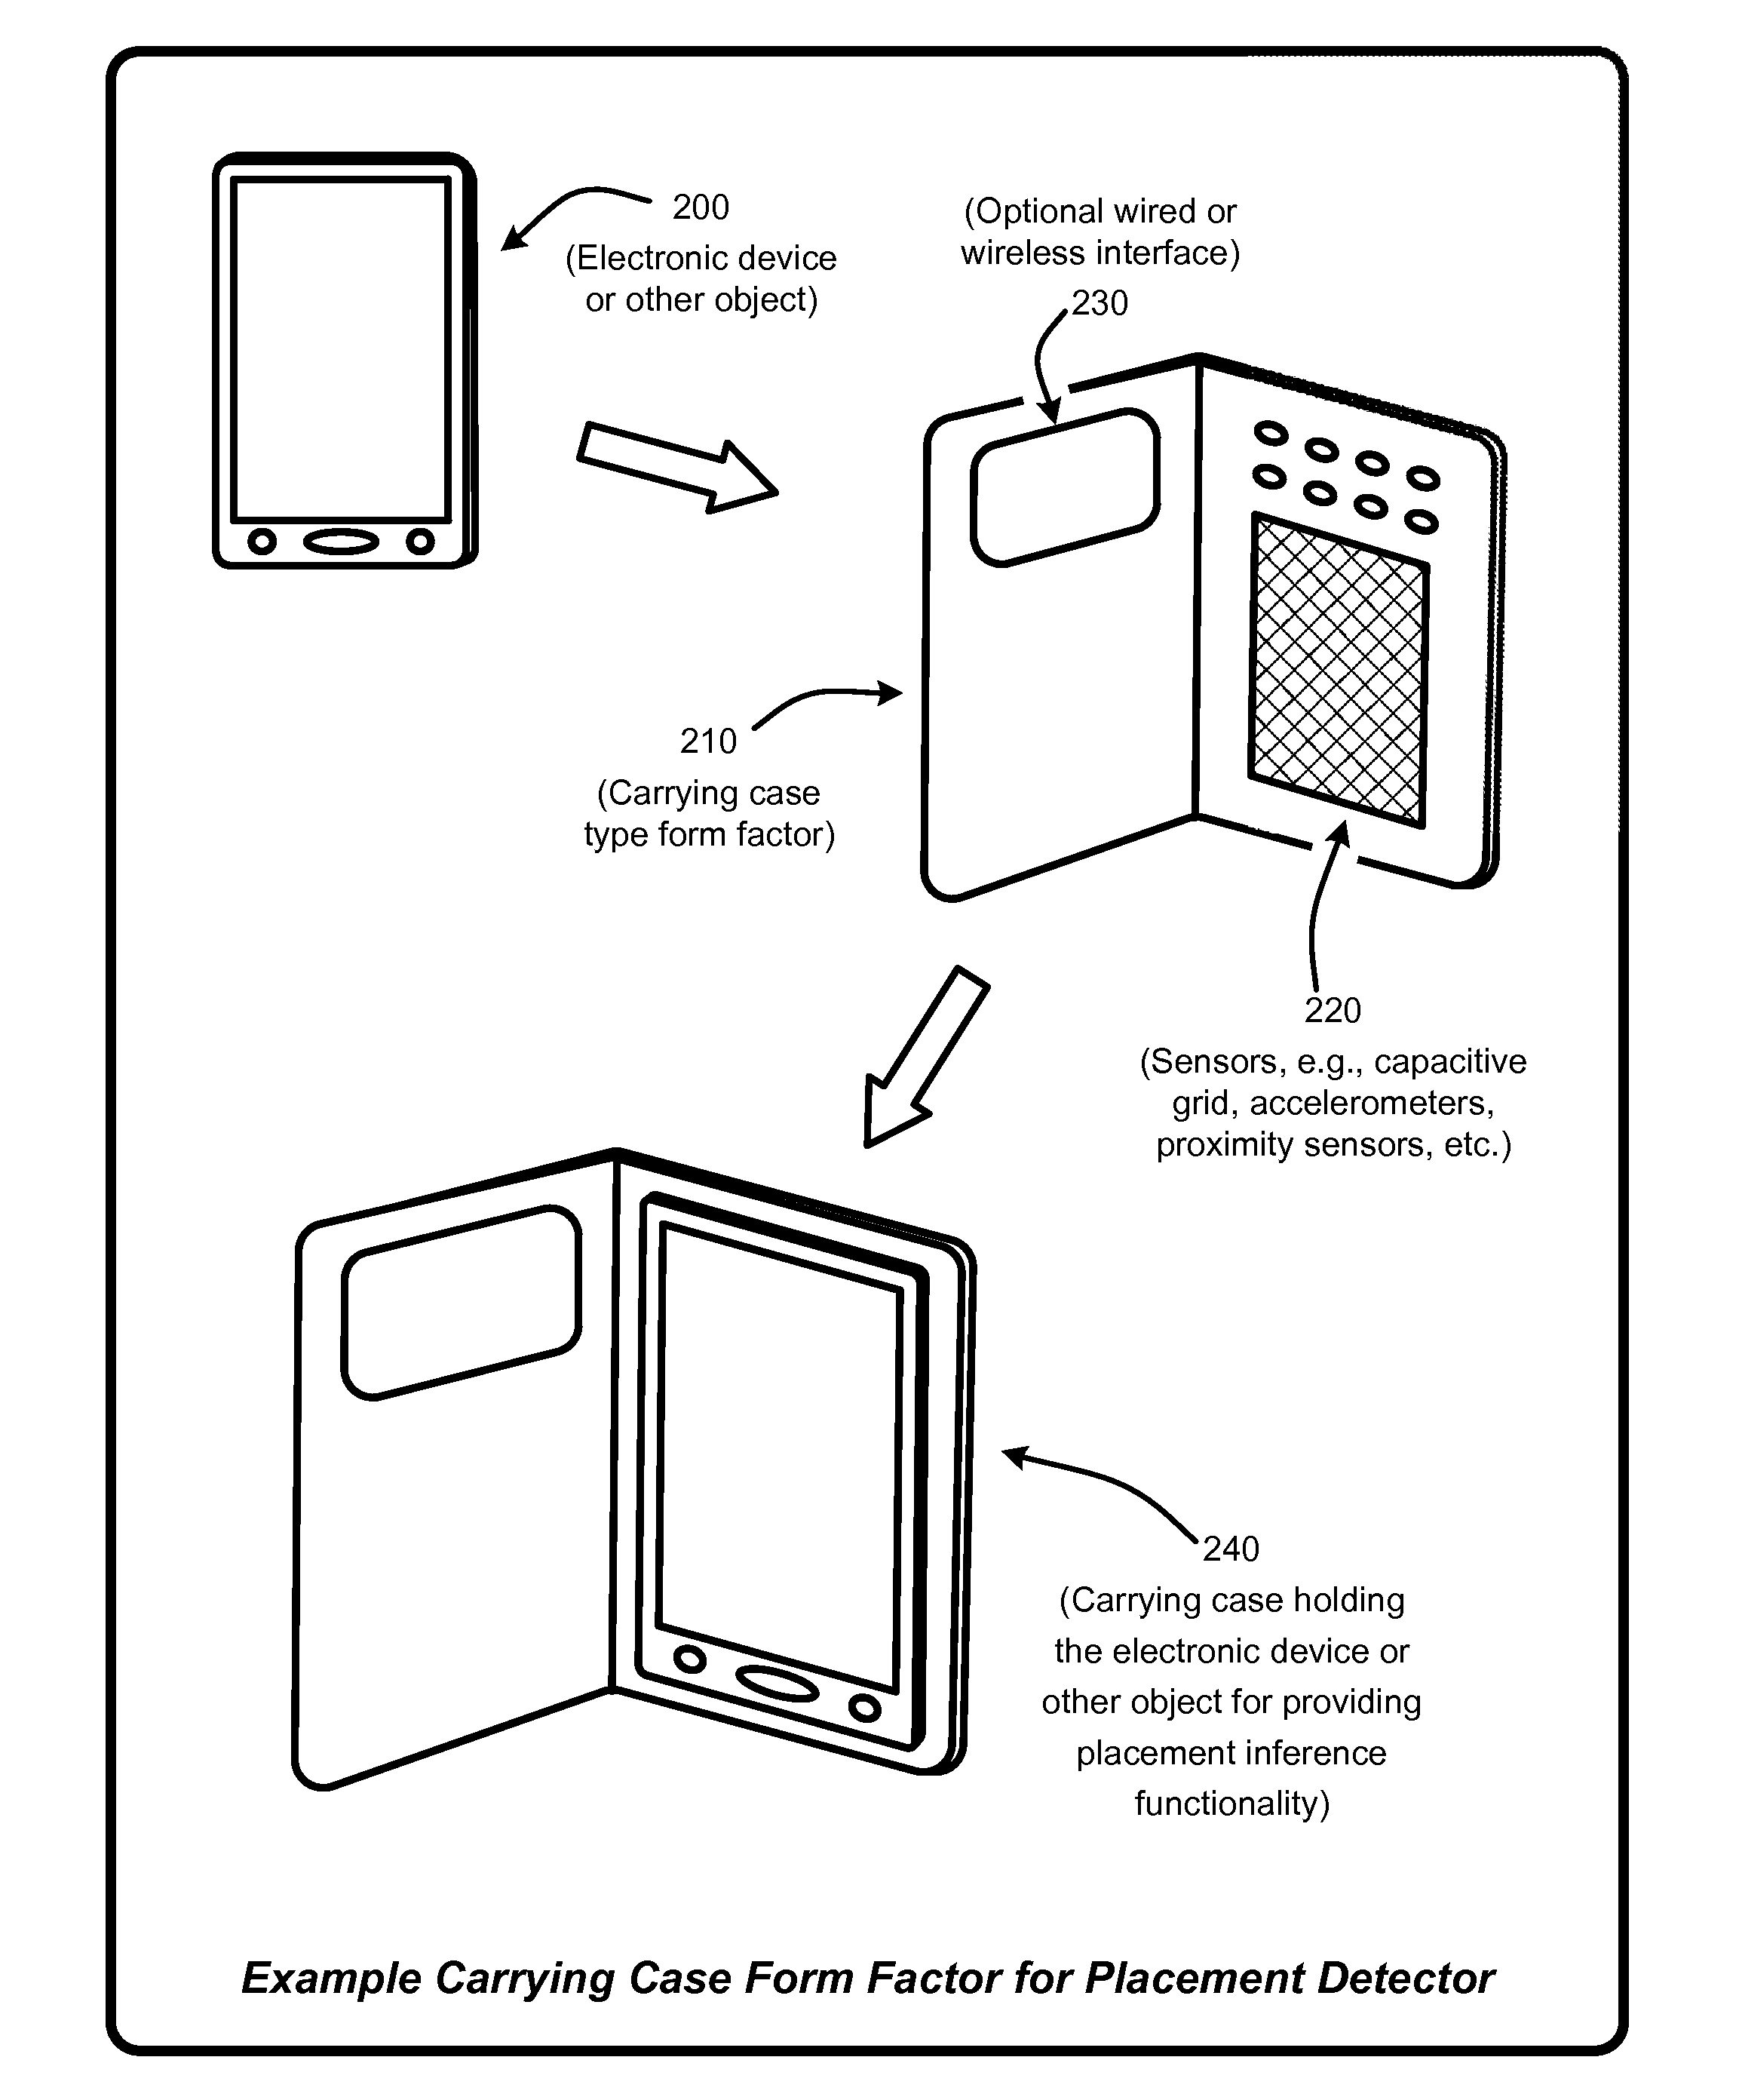 Inferring placement of mobile electronic devices